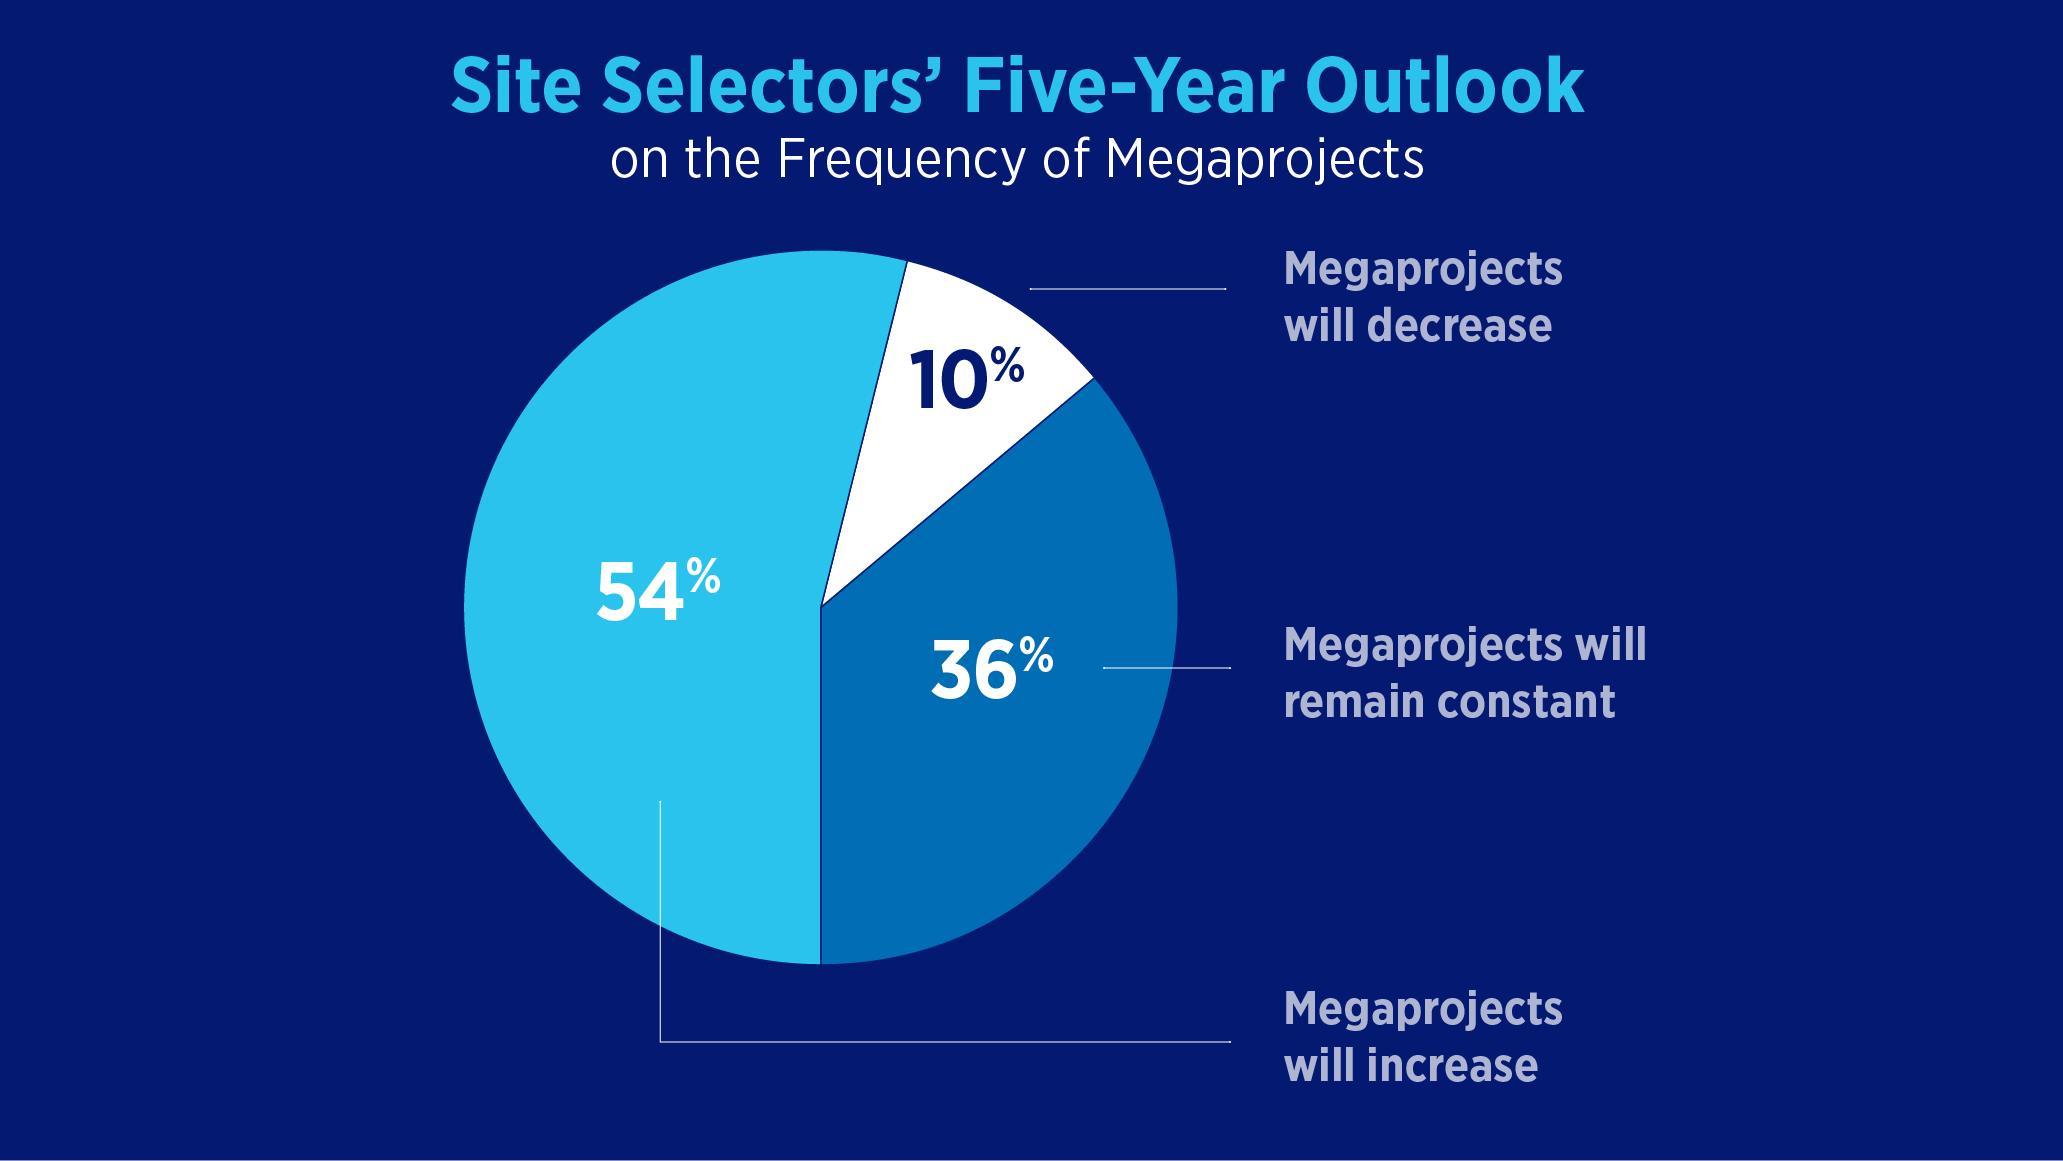 Pie chart showing 54% believe megaproject activity will increase